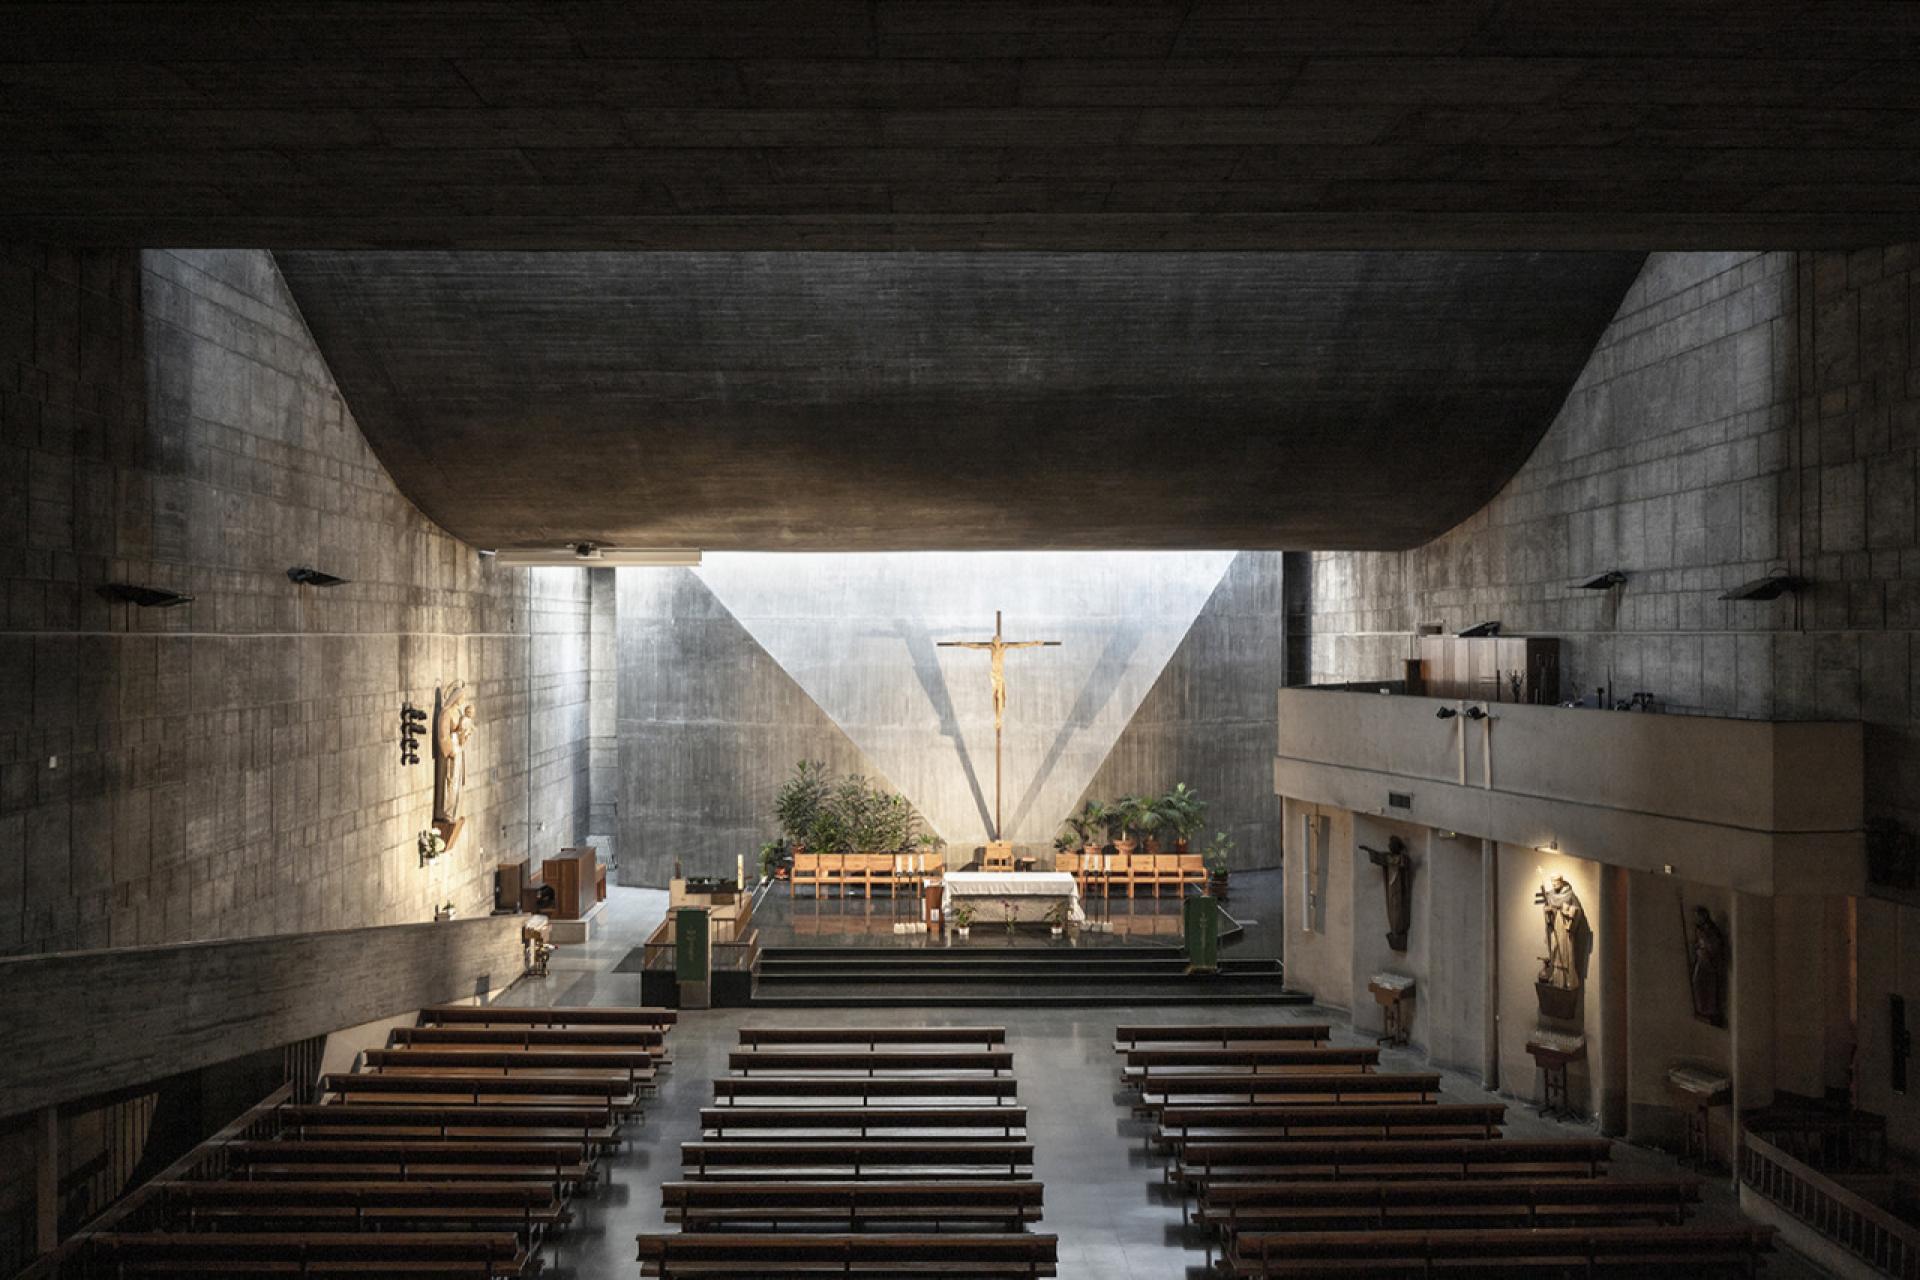 Parish of Our Lady of the Rosary of the Philippines by Cecilio Sanchez-Robles Tarín (1967-1970)